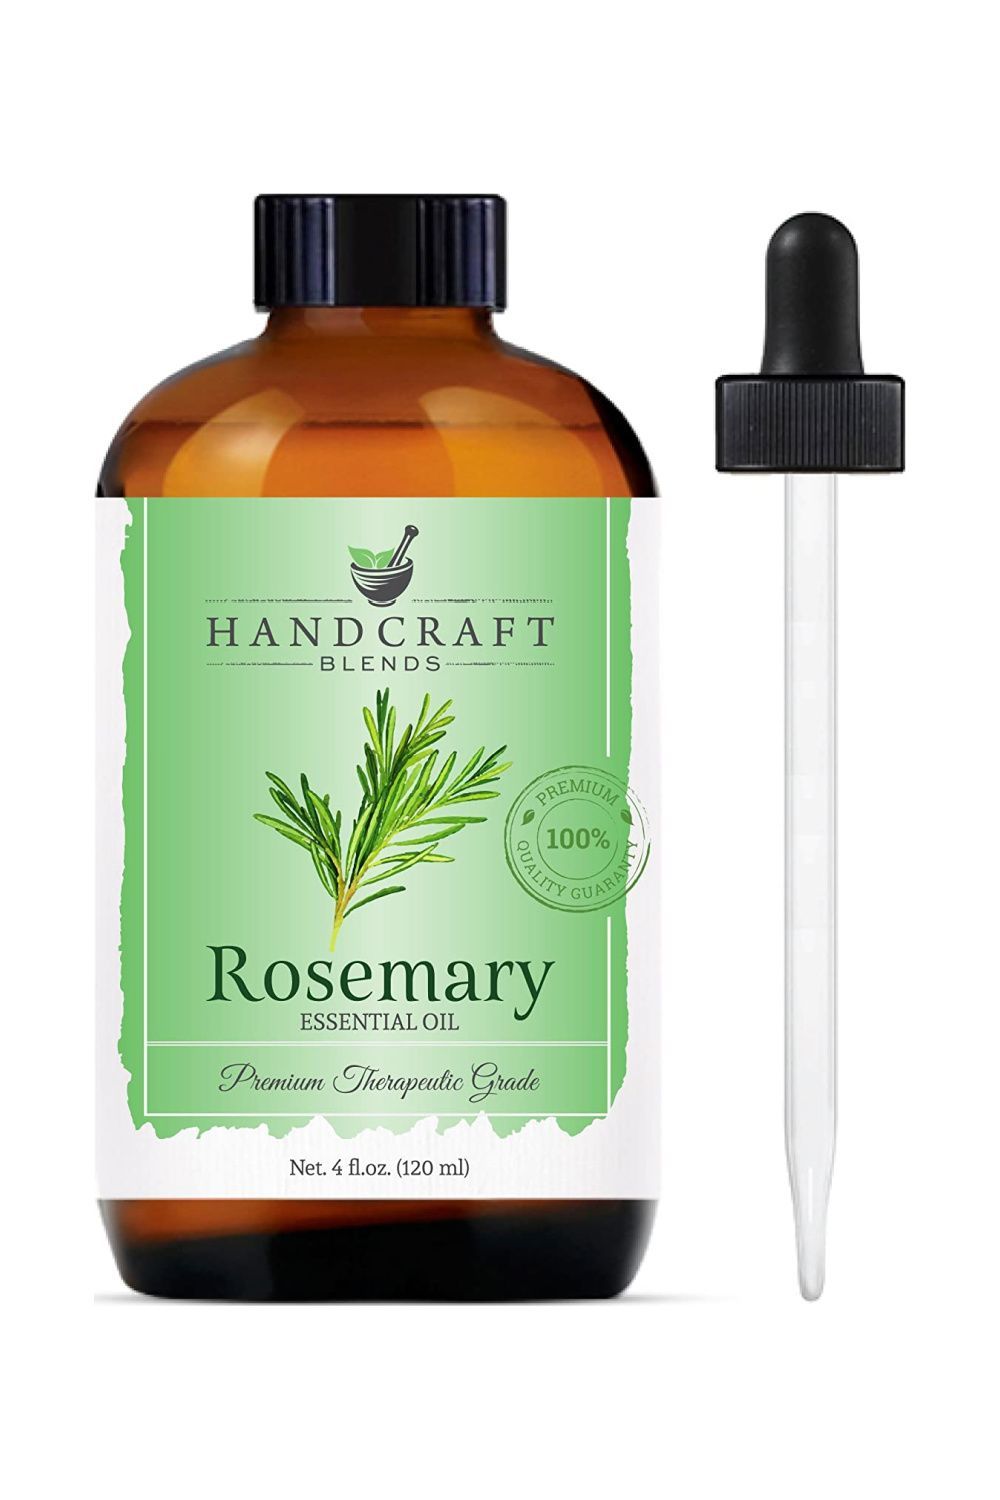 Rosemary Oil for Hair Growth: Does It Work, According to Derms